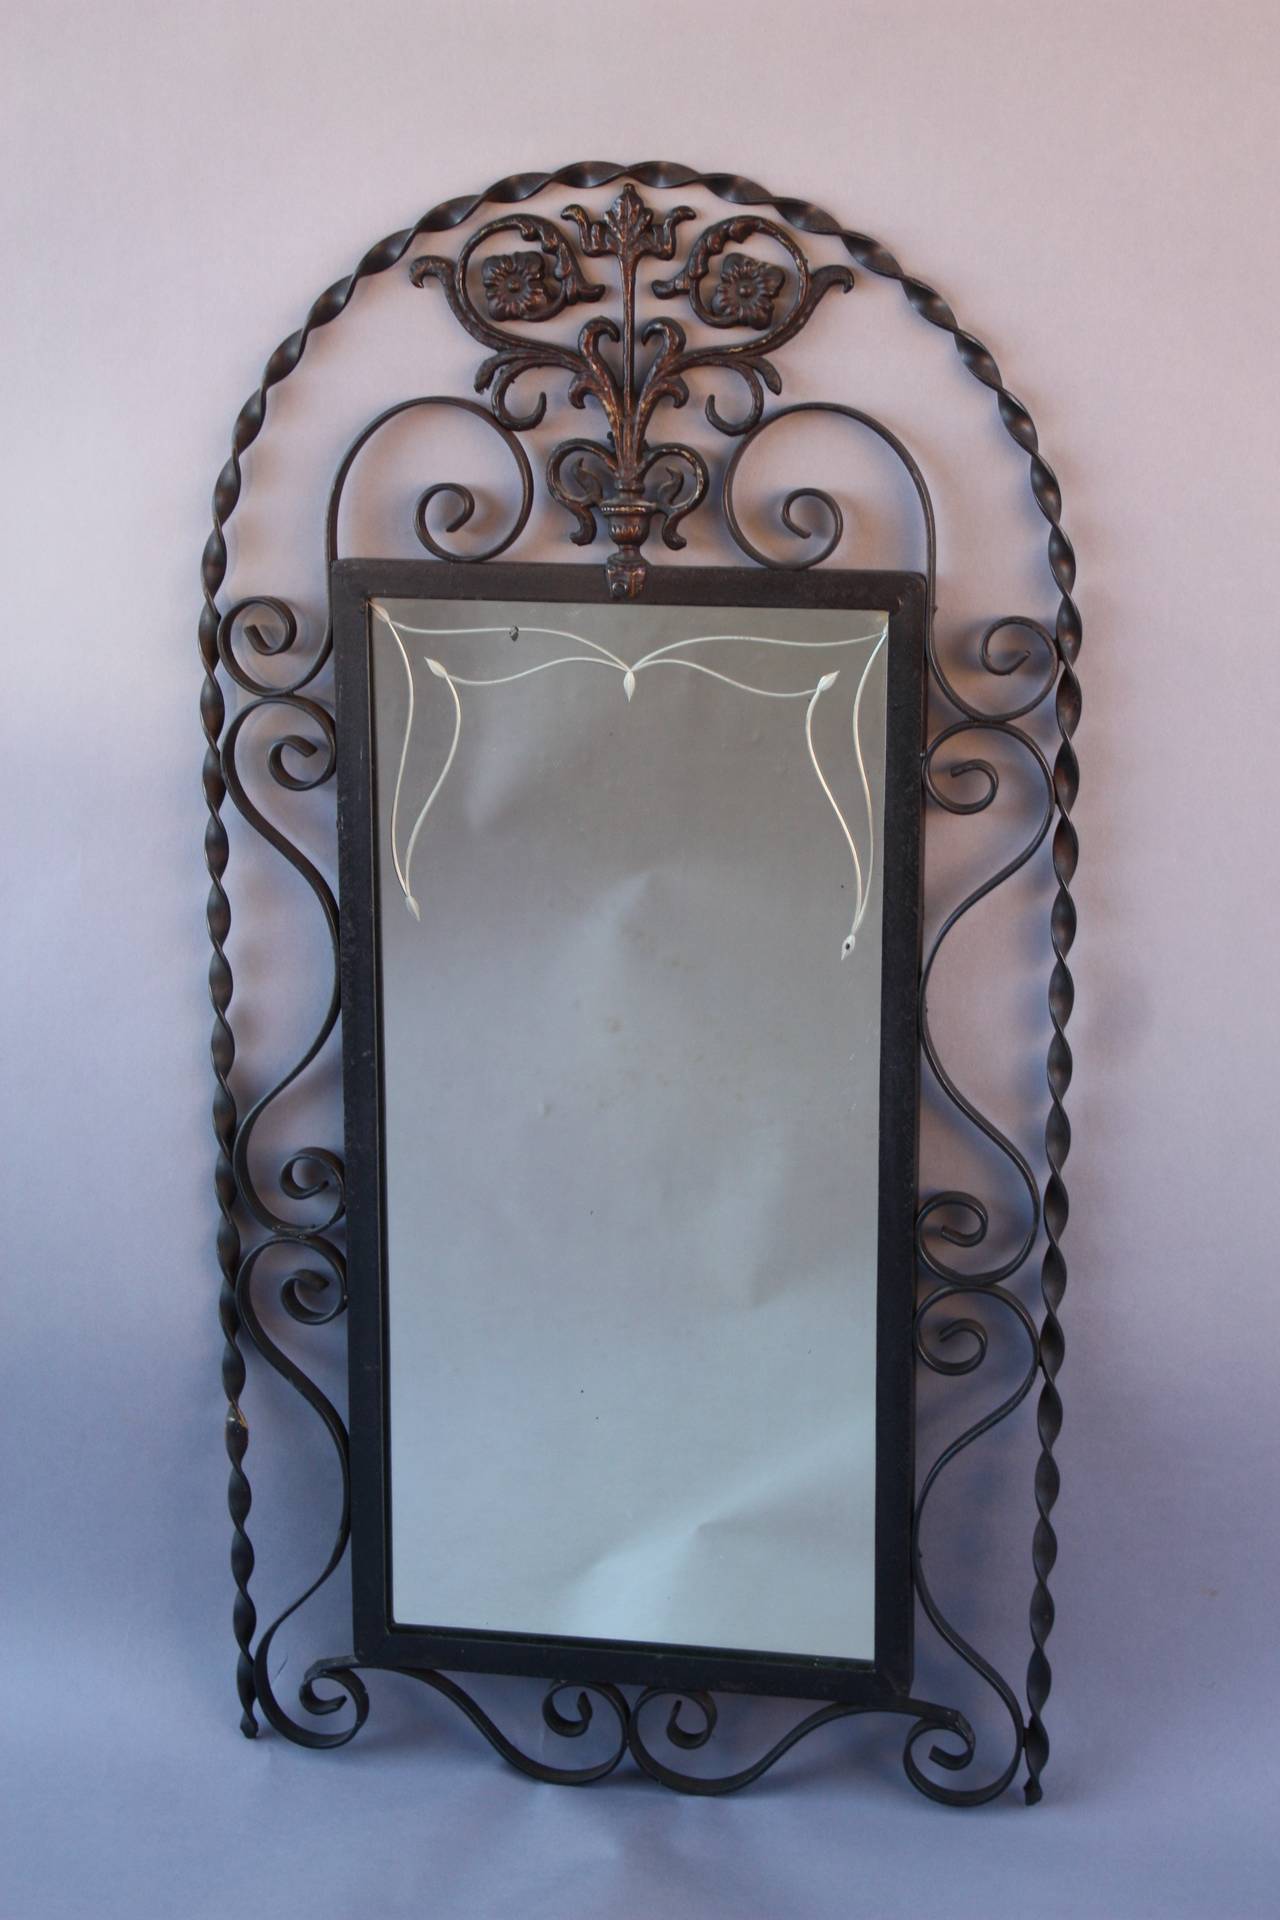 Mirror with original etched glass and original polychrome finish, circa 1920s. Mirror retains its original Pacific Glass label from East LA. Measures: 34 7/8